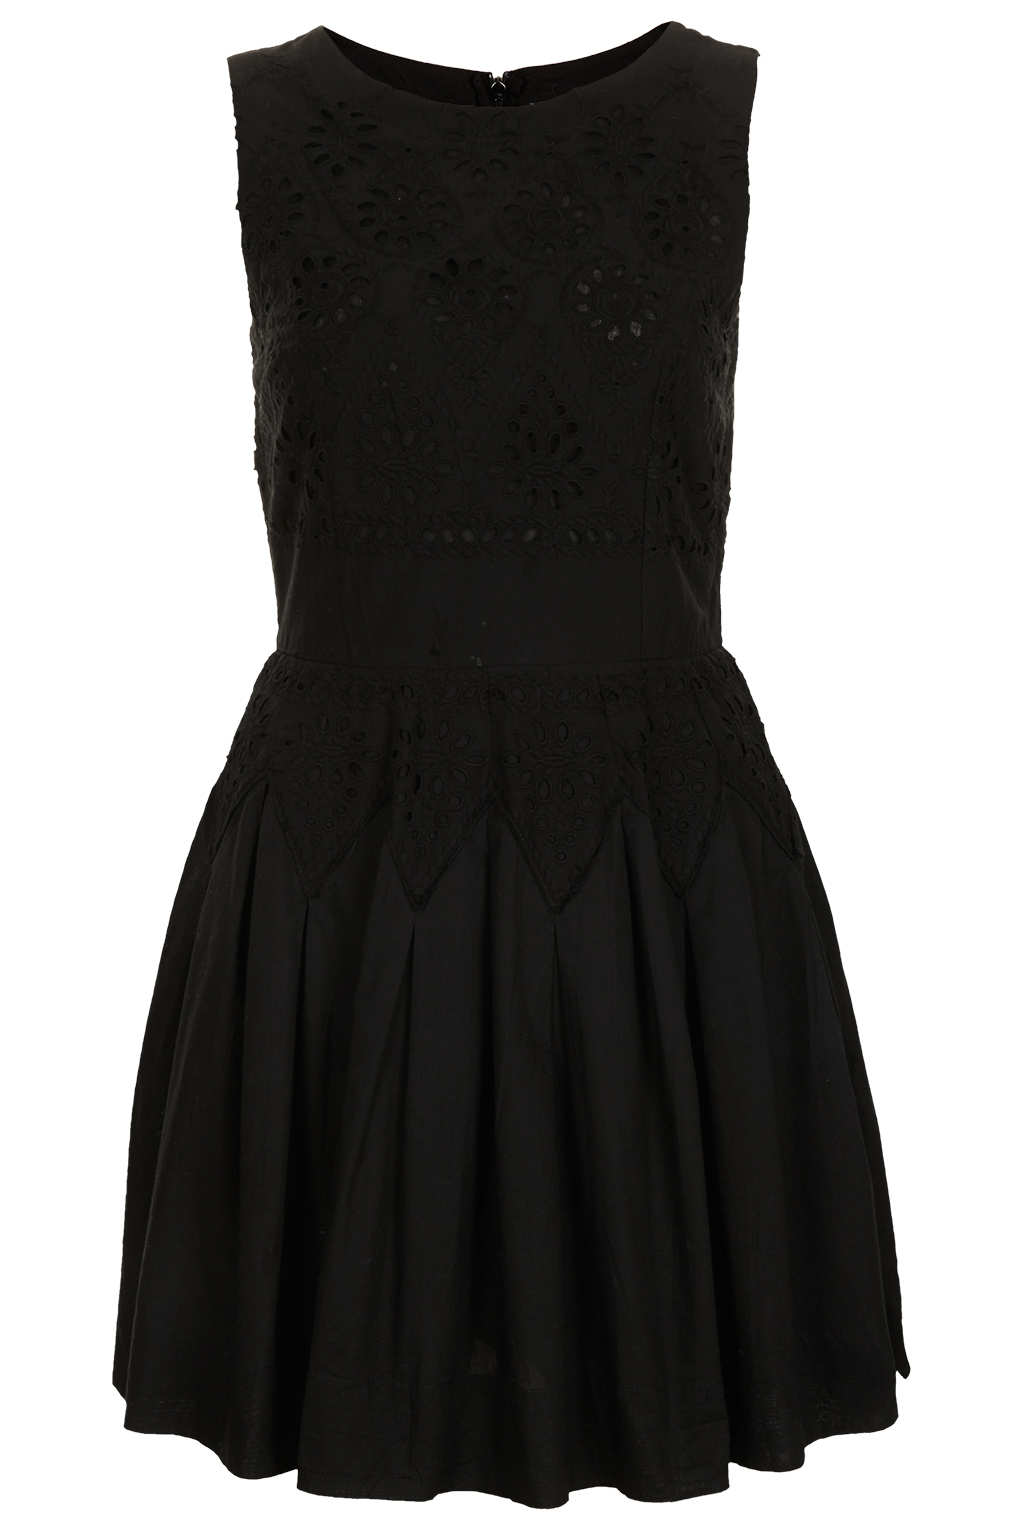 Lyst - Topshop Broiderie Bodice Sundress in Black